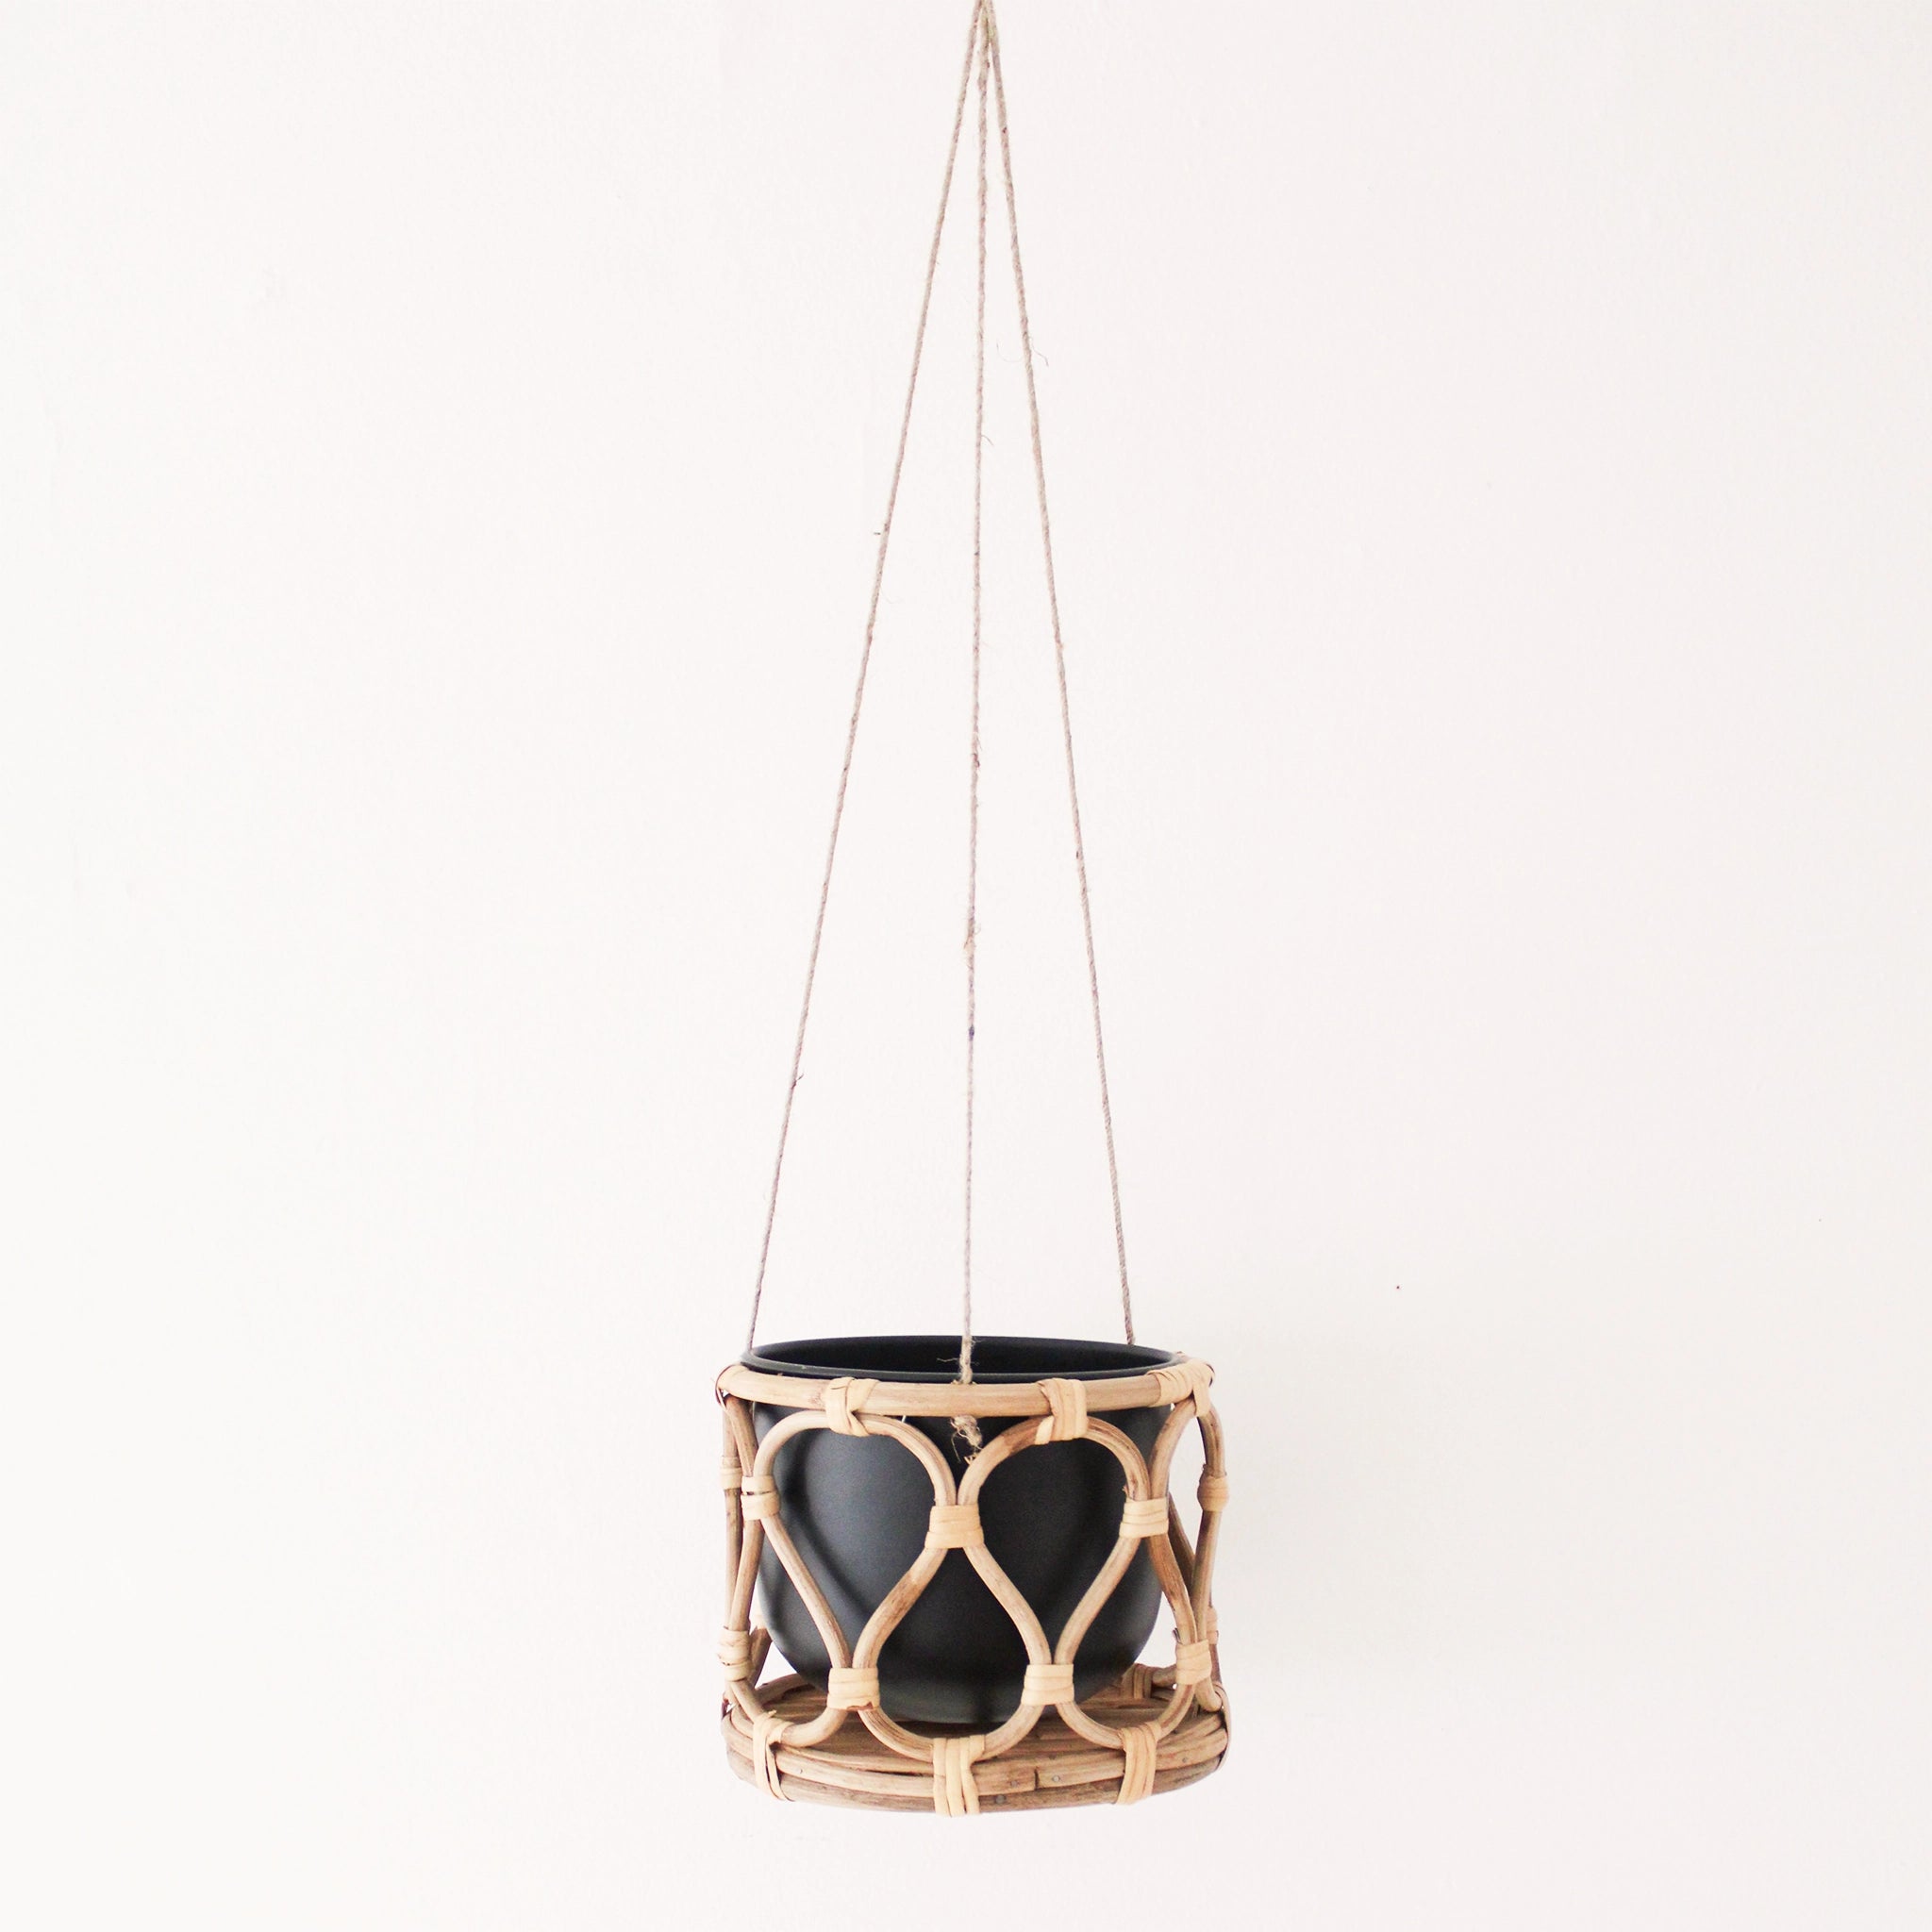 A hanging rattan planter with a black insert pot hanging in front of a white background. The rattan is bent into a rounded lattice pattern. The planter has a green trailing Pothos plant hanging inside of it.